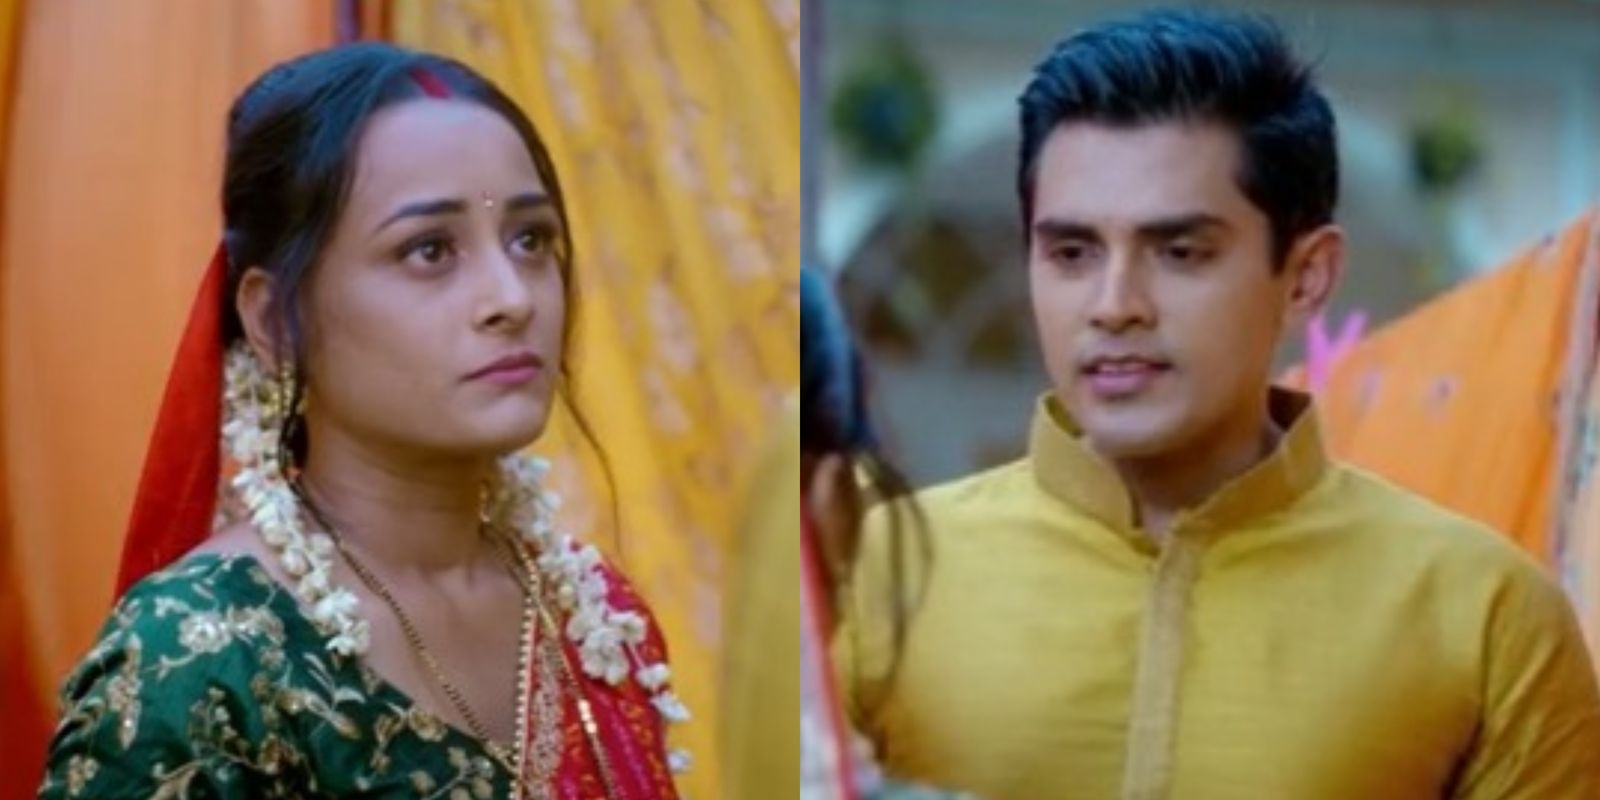 Saath Nibhaana Saathiya 2 Promo: Gehna Begins Her New Journey As A Bahu; Will She Be Able To Leave Her Past Behind?